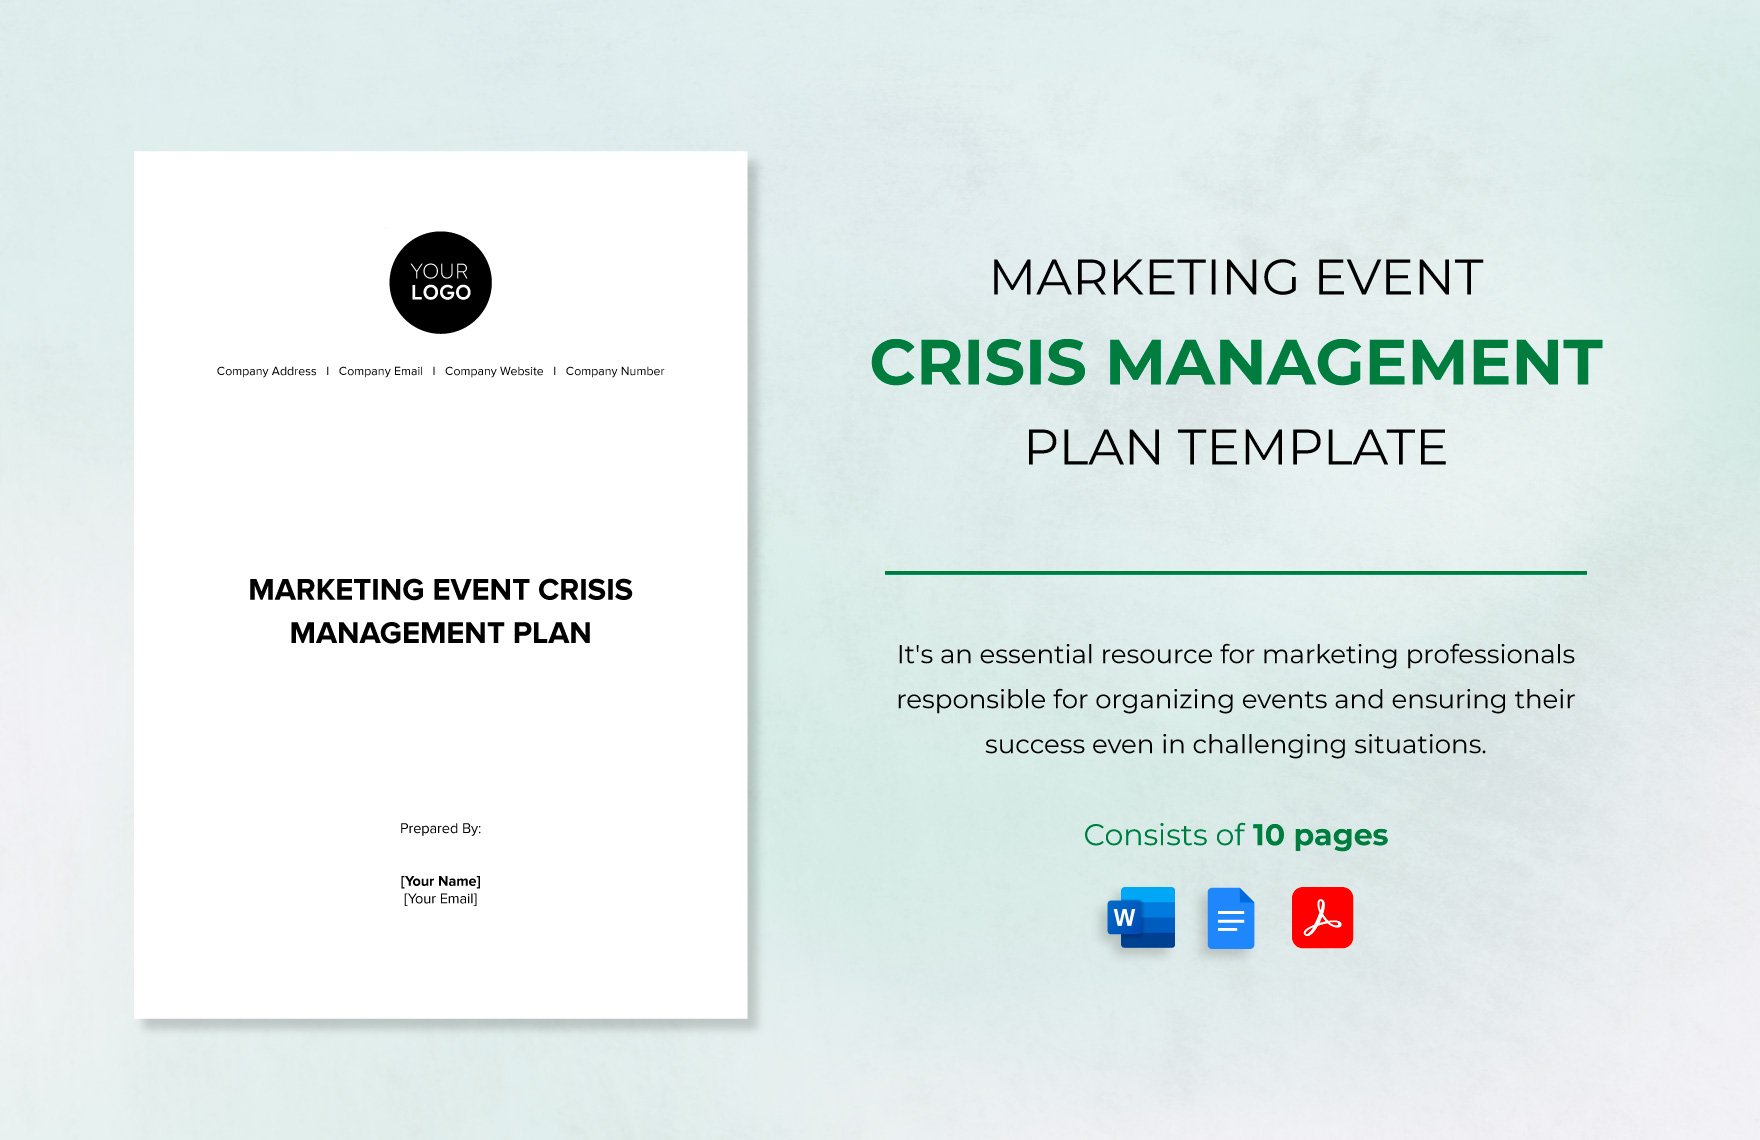 Marketing Event Crisis Management Plan Template in Word, Google Docs, PDF